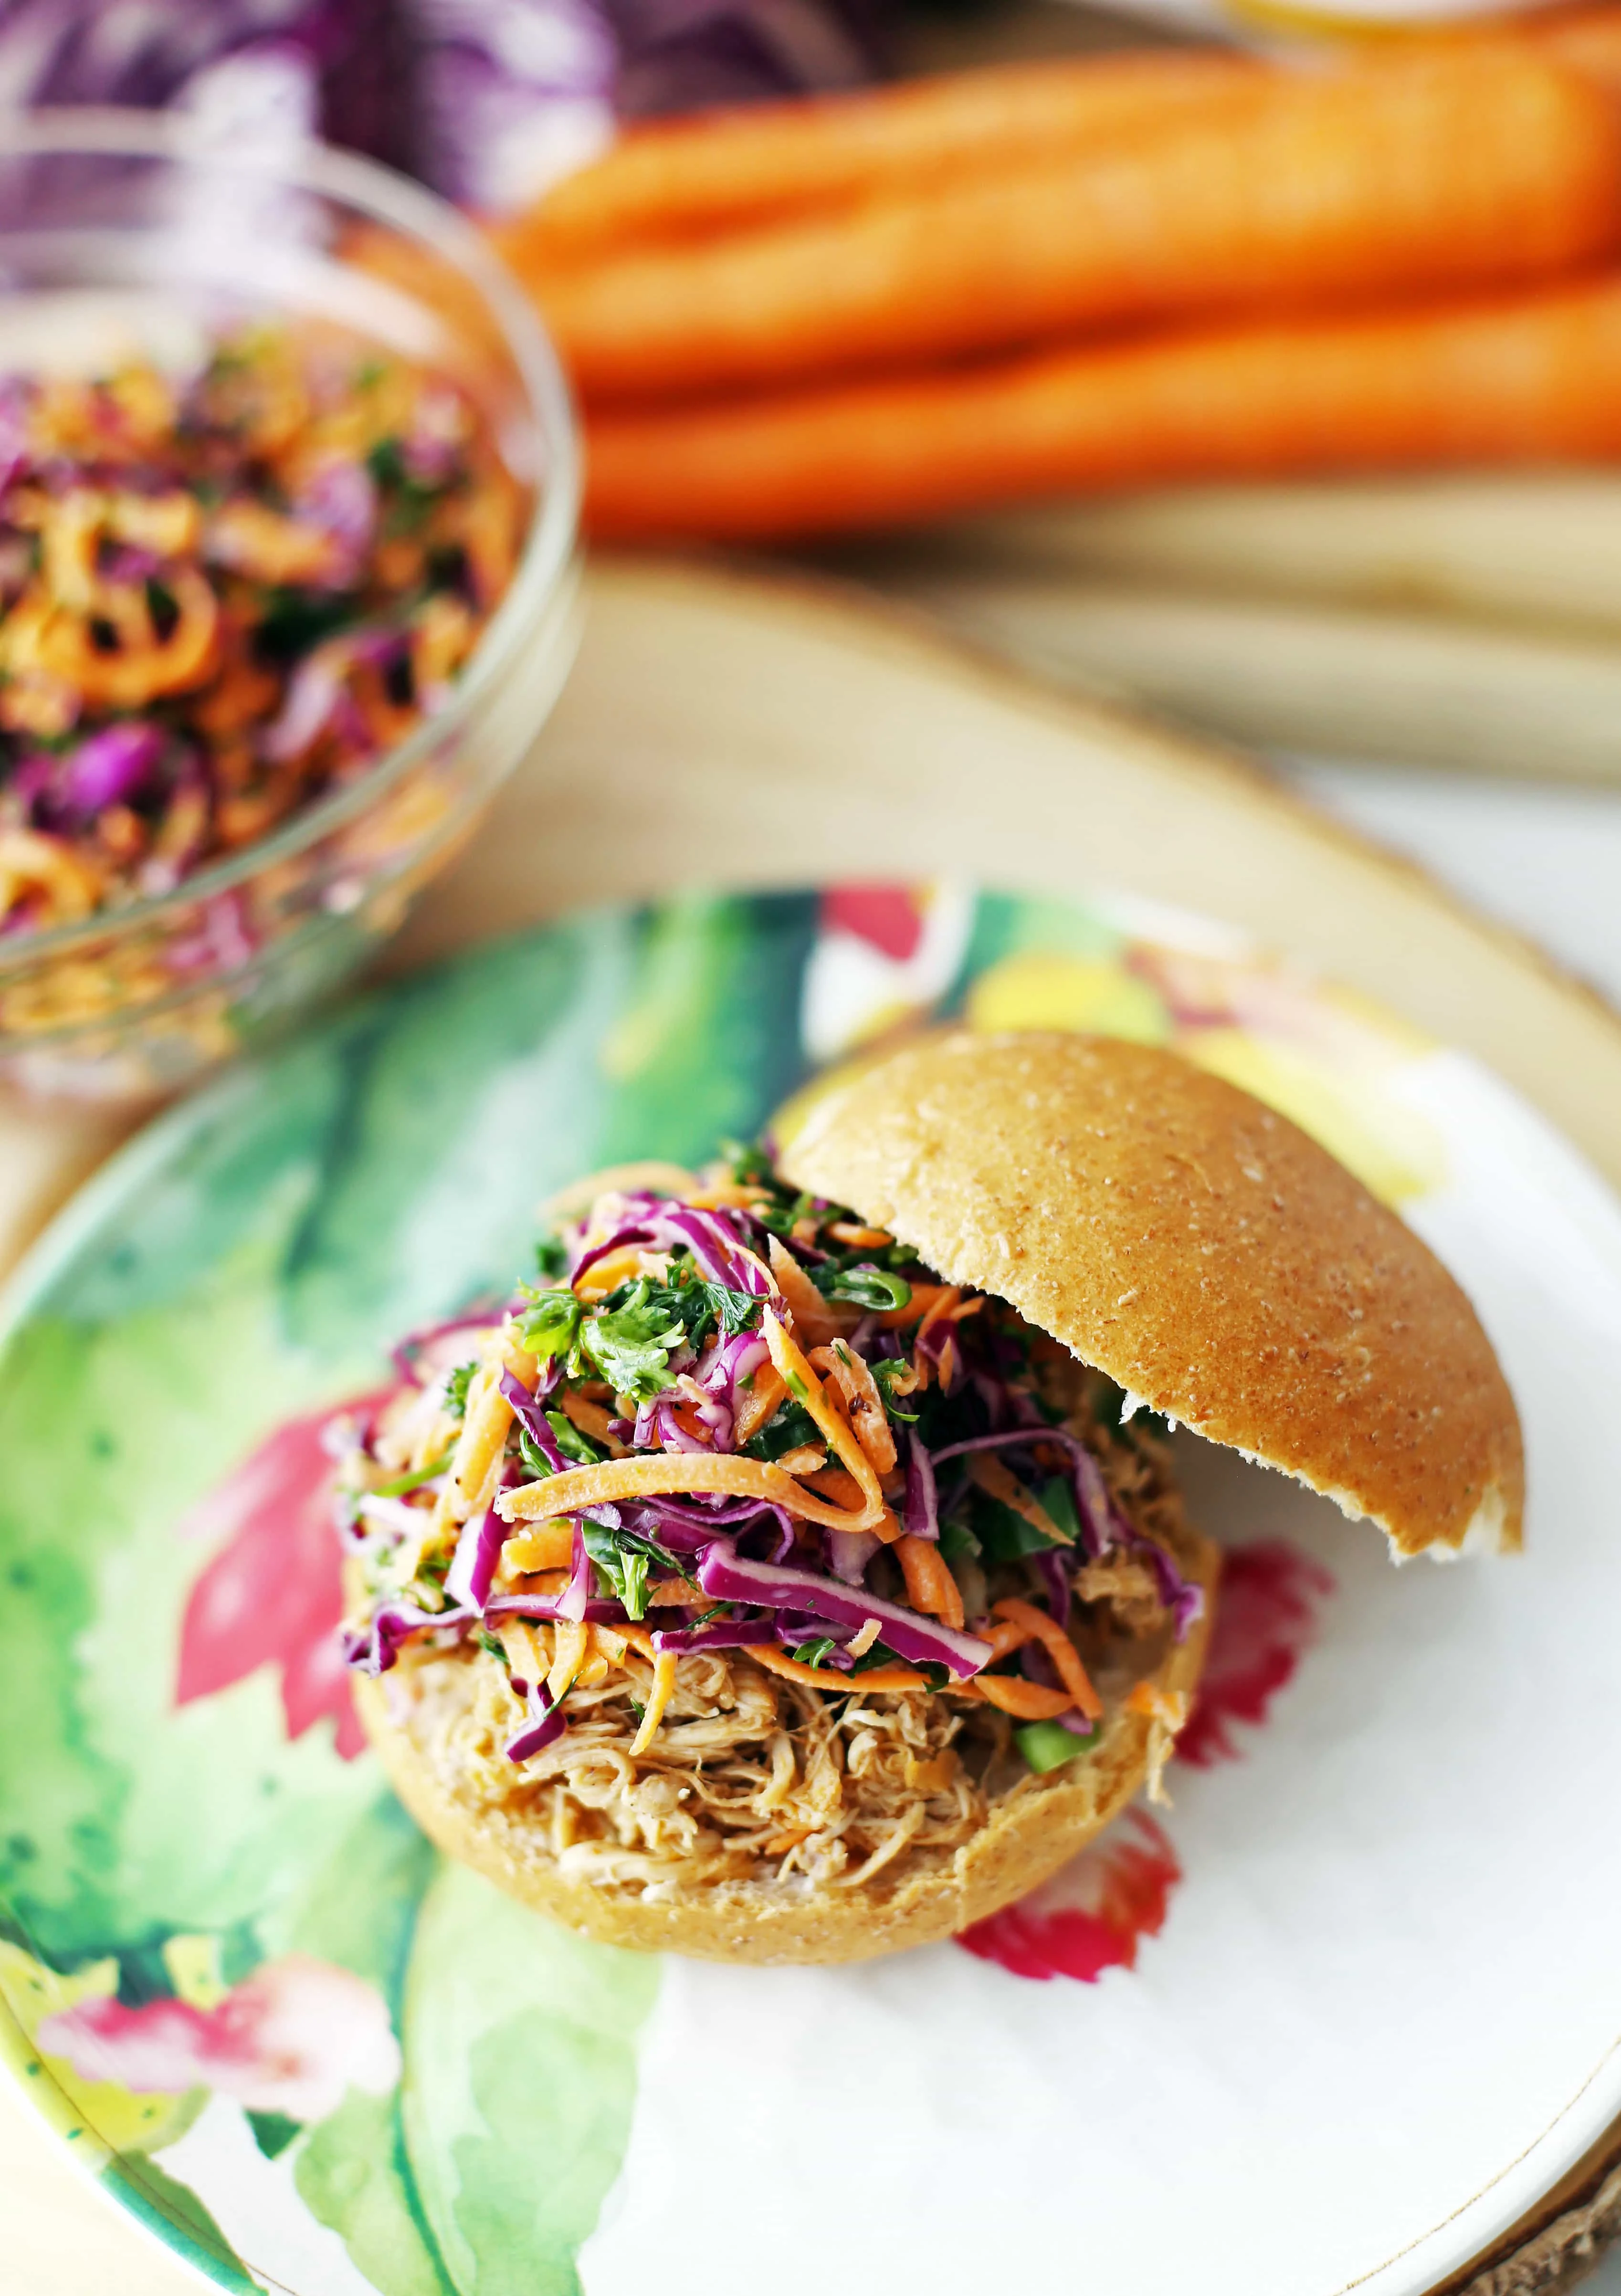 A pulled chicken burger with healthy carrot cabbage slaw topping.